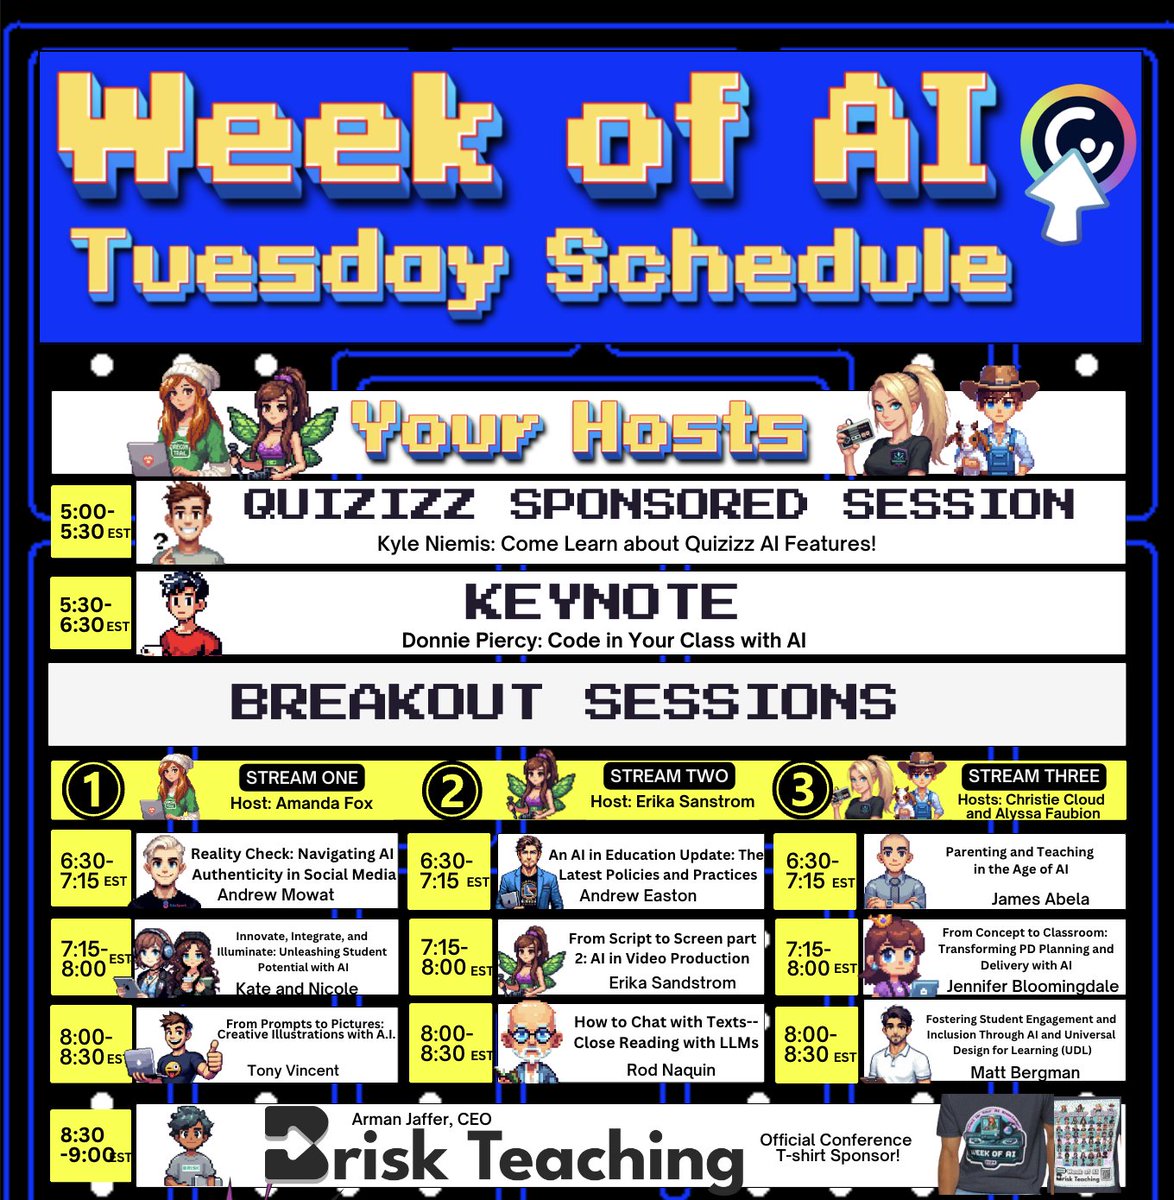 Tuesday's schedule for #WeekofAI is now live! 💡 Don't miss out on this incredible opportunity to level up your skills! Check out the schedule now and get ready for an epic day of learning and discovery! 🚀 #AIineducation #AIClassroom @briskteaching @quizizz